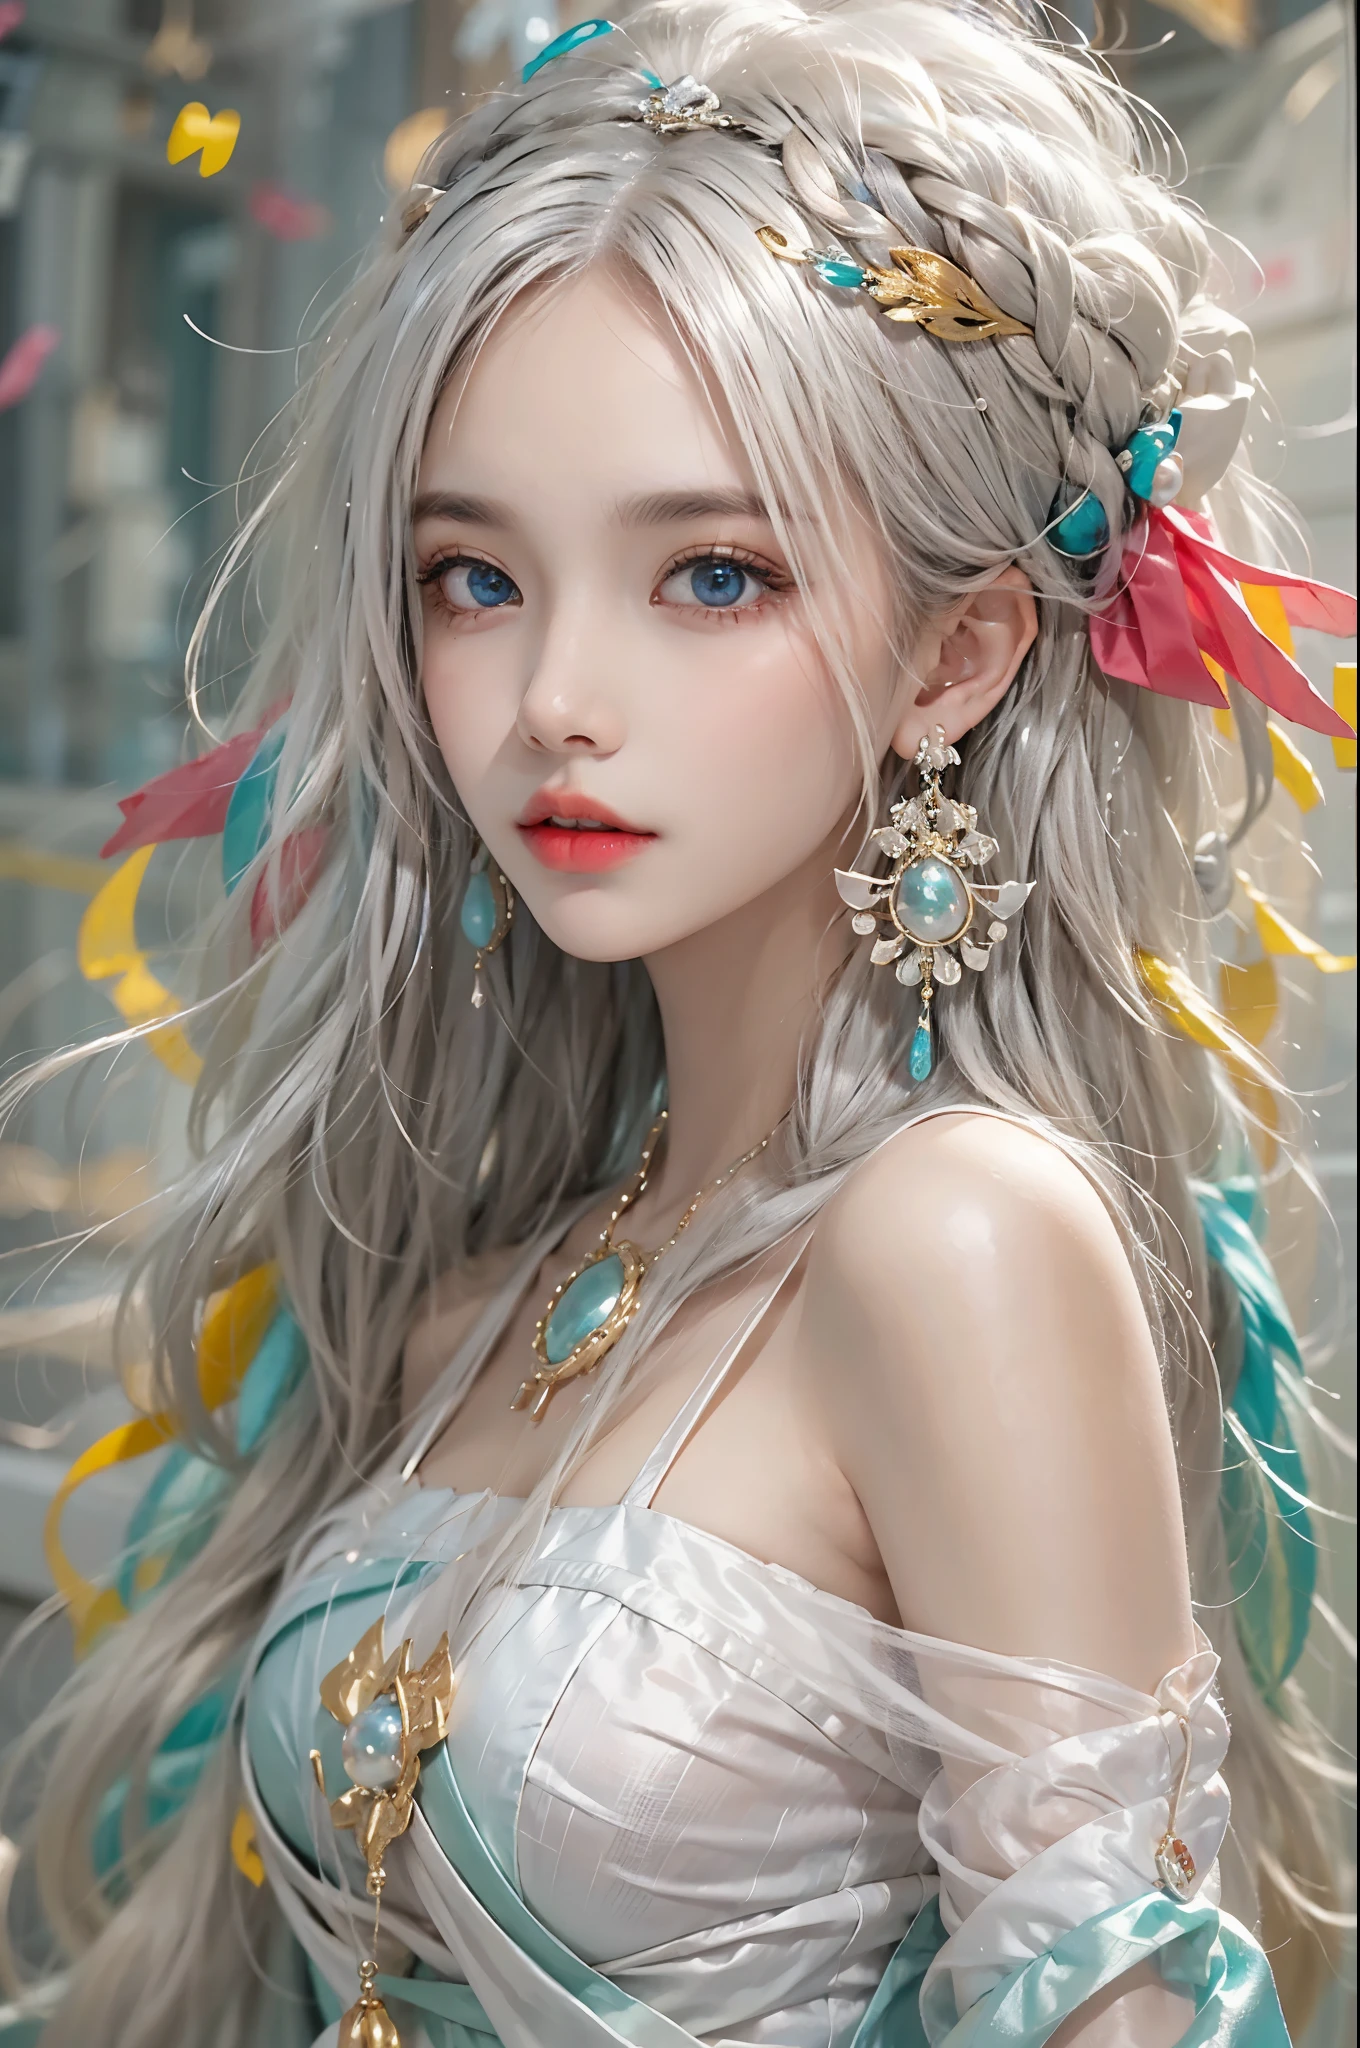 realisticlying, A high resolution, Colorful, 1 girl, Alone, hip-up, pretty eyes, long whitr hair,  Gorgeous accessories, Wear pearl earrings